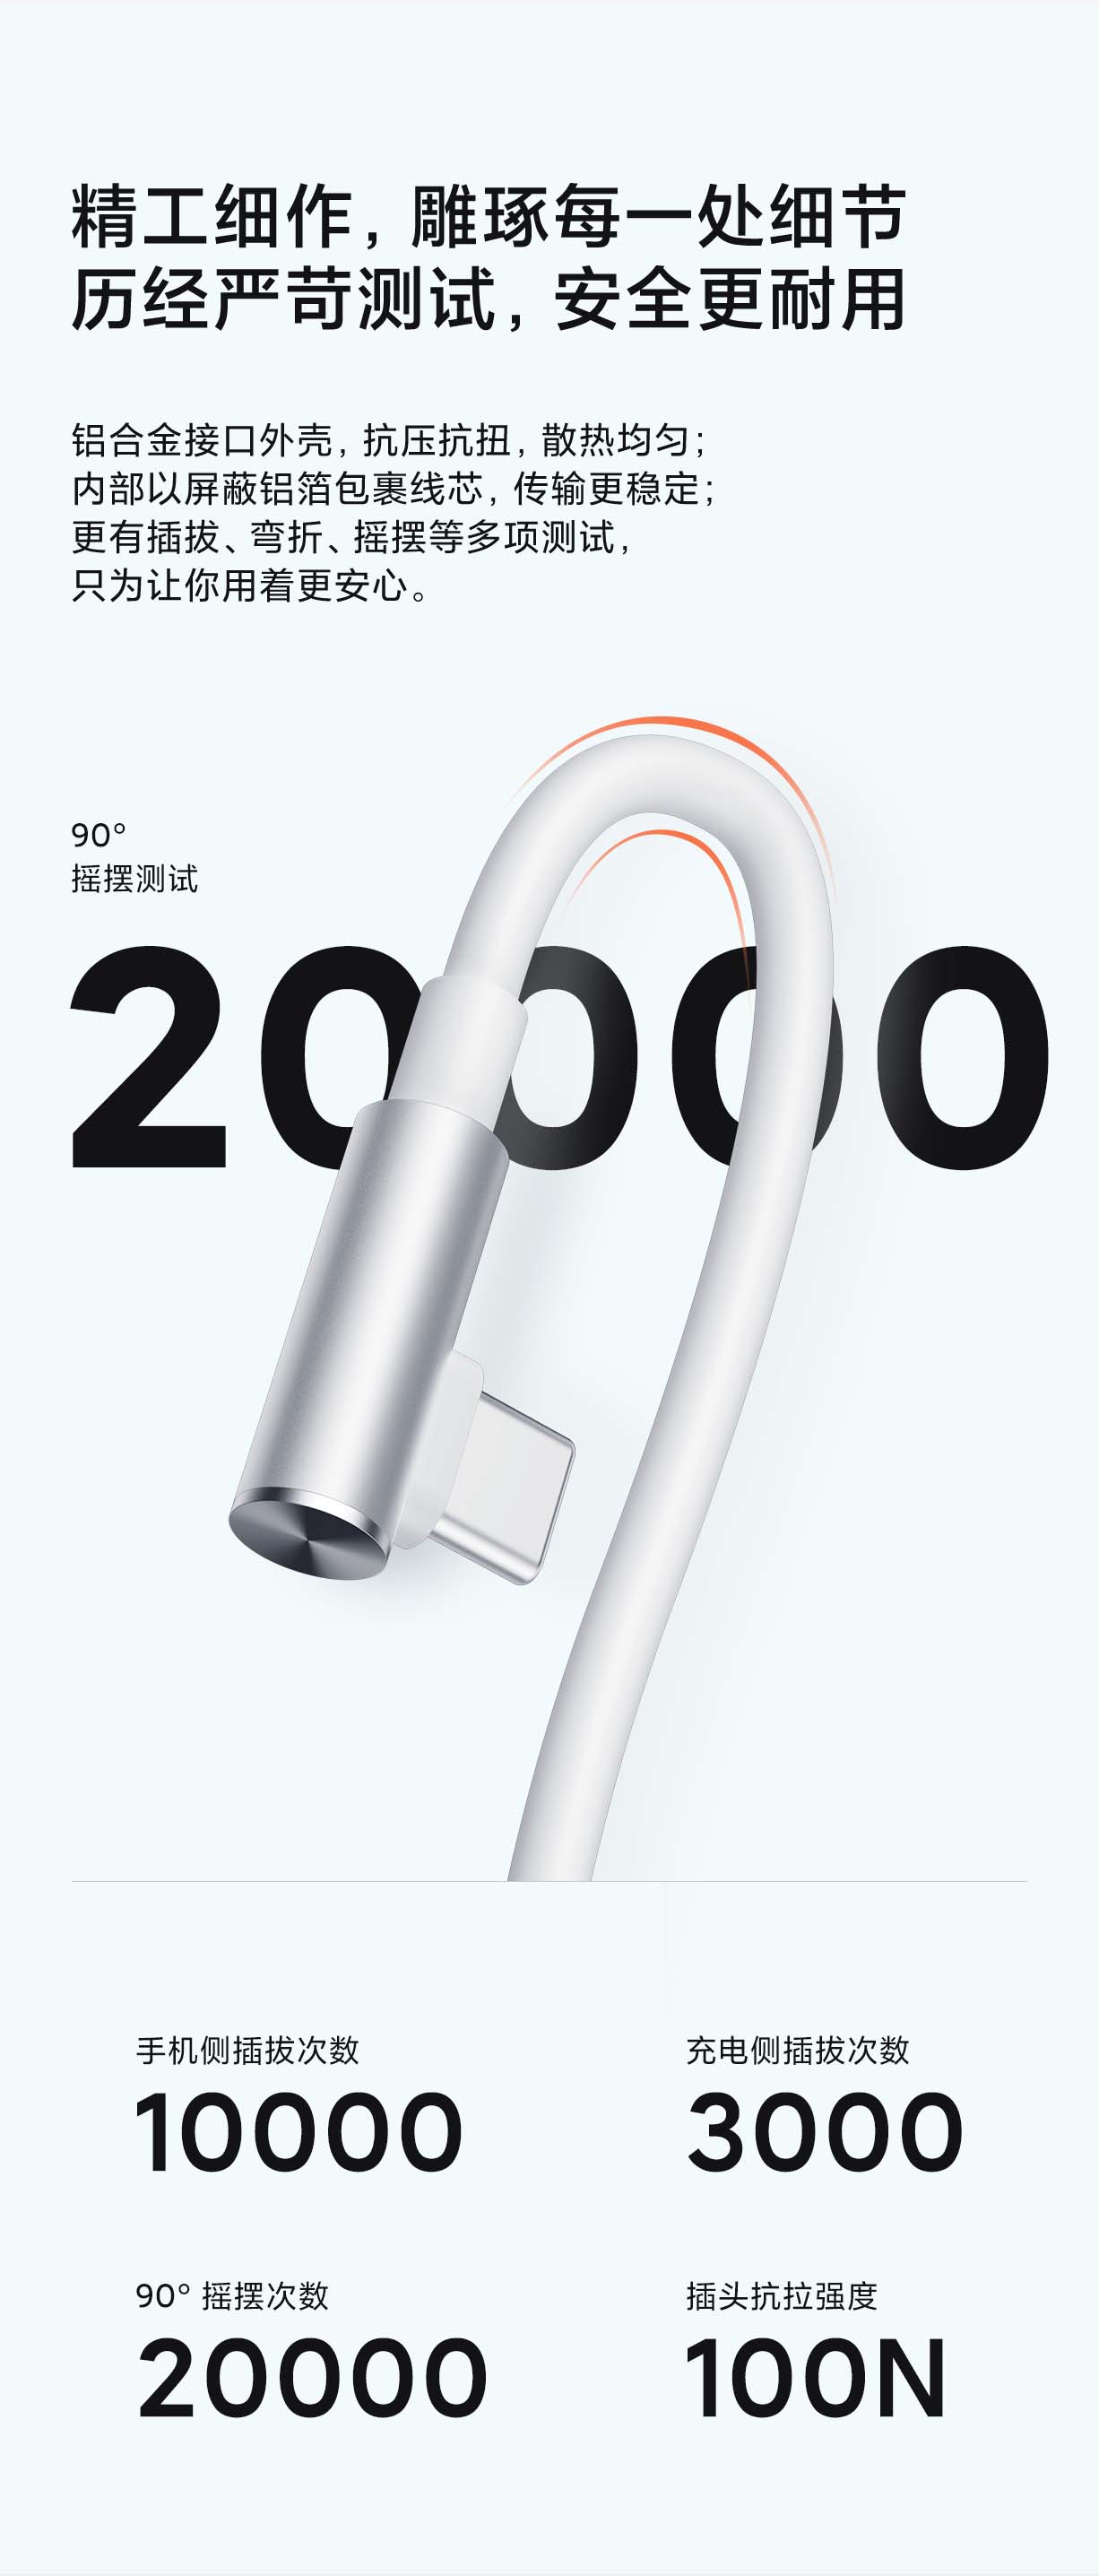 Xiaomi 6A USB-A to Type-C Elbow Fast Charging Cable